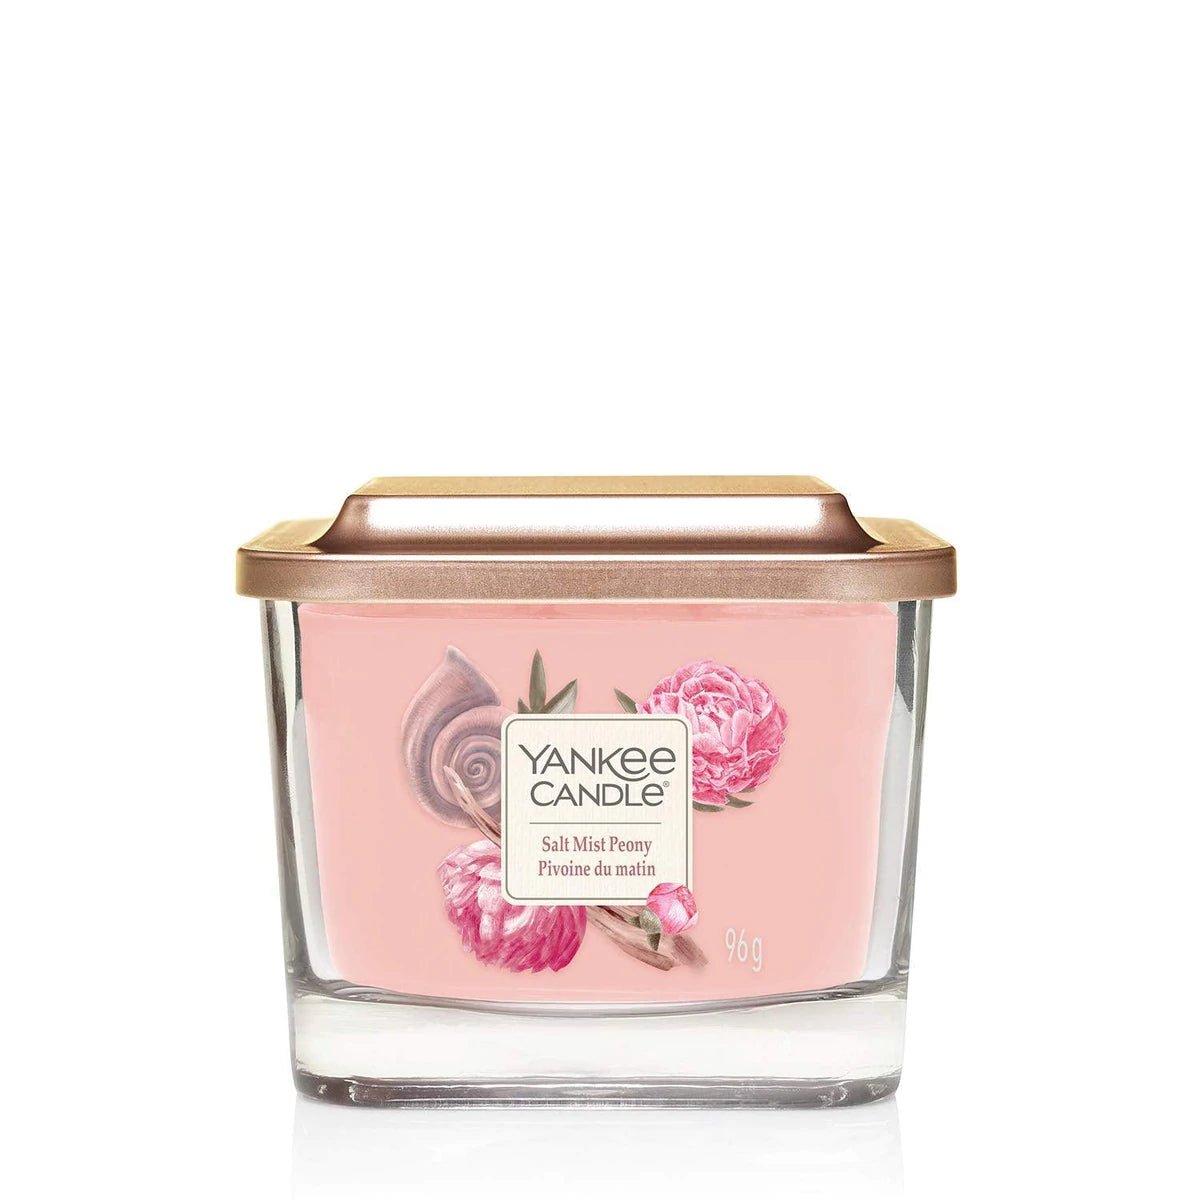 Yankee Candle Elevation Small Square Vessel Salt Mist Peony 96 G - AllurebeautypkYankee Candle Elevation Small Square Vessel Salt Mist Peony 96 G